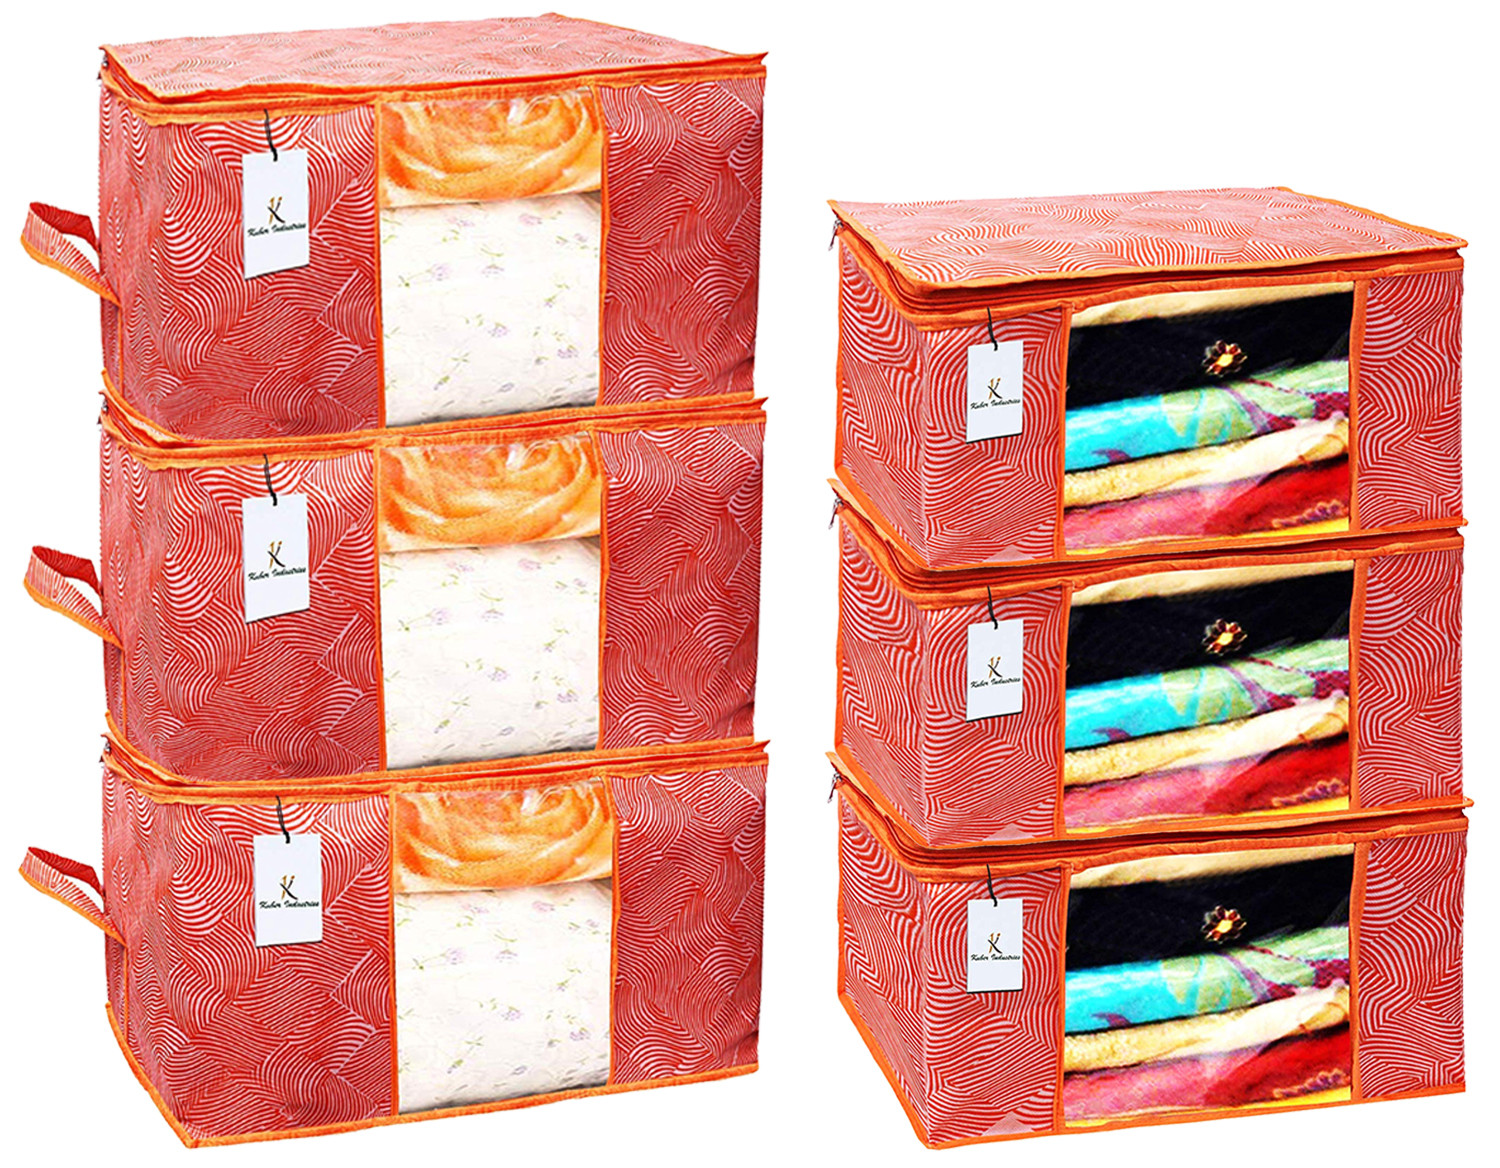 Kuber Industries Laheriya Printed Non Woven Saree Cover And Underbed Storage Bag, Cloth Organizer For Storage, Blanket Cover Combo Set (Orange) -CTKTC38691